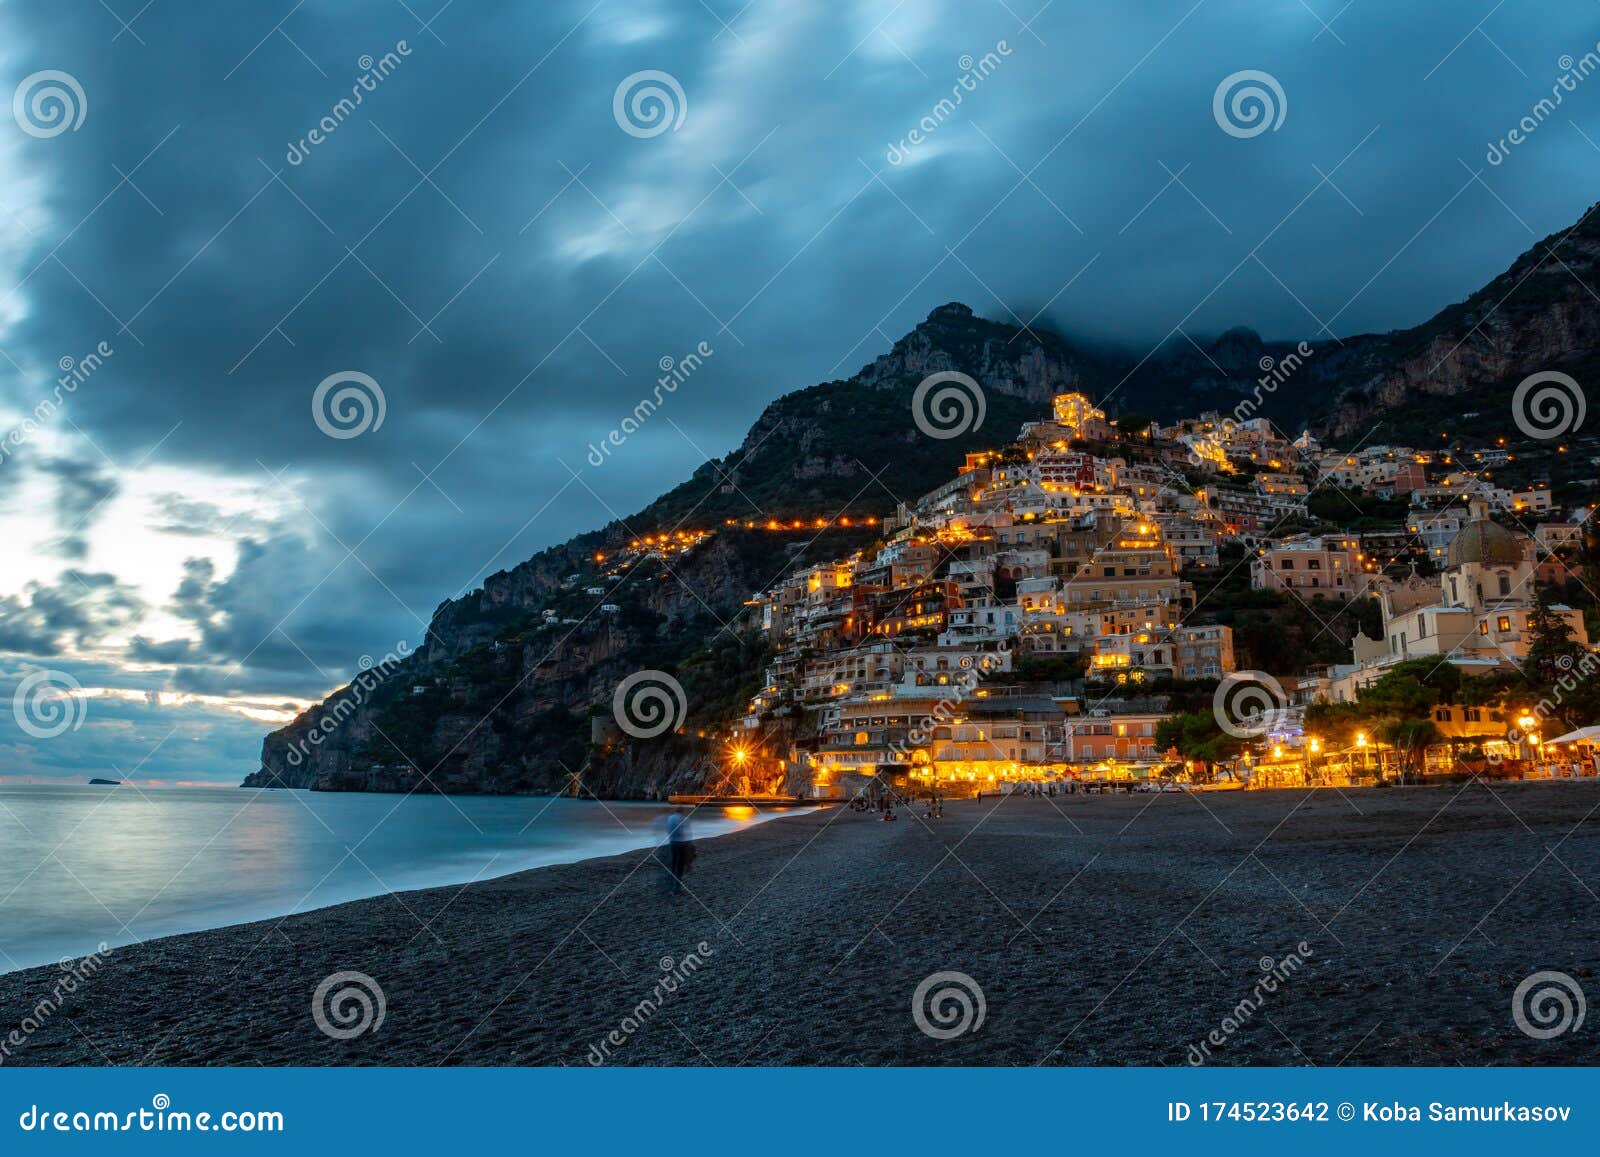 landscape with positano town at famous amalfi coast at sunset, italy